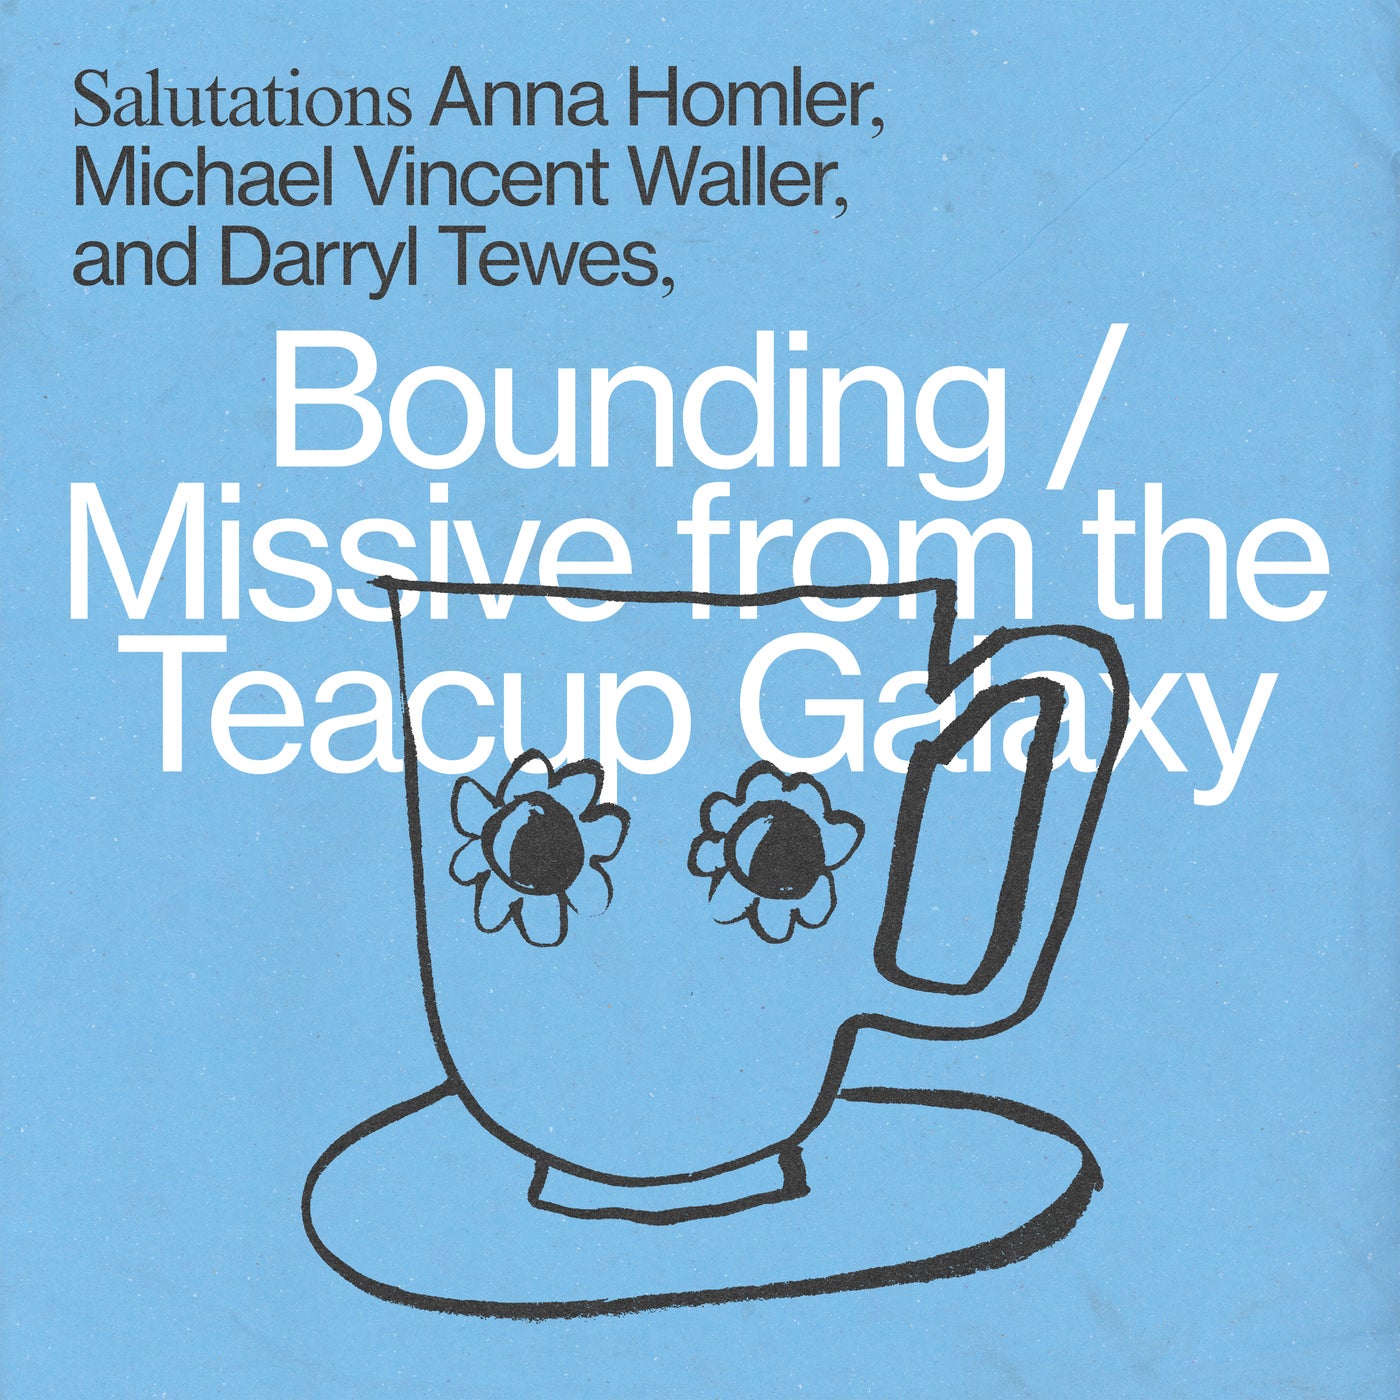 Bounding / Missive from the Teacup Galaxy